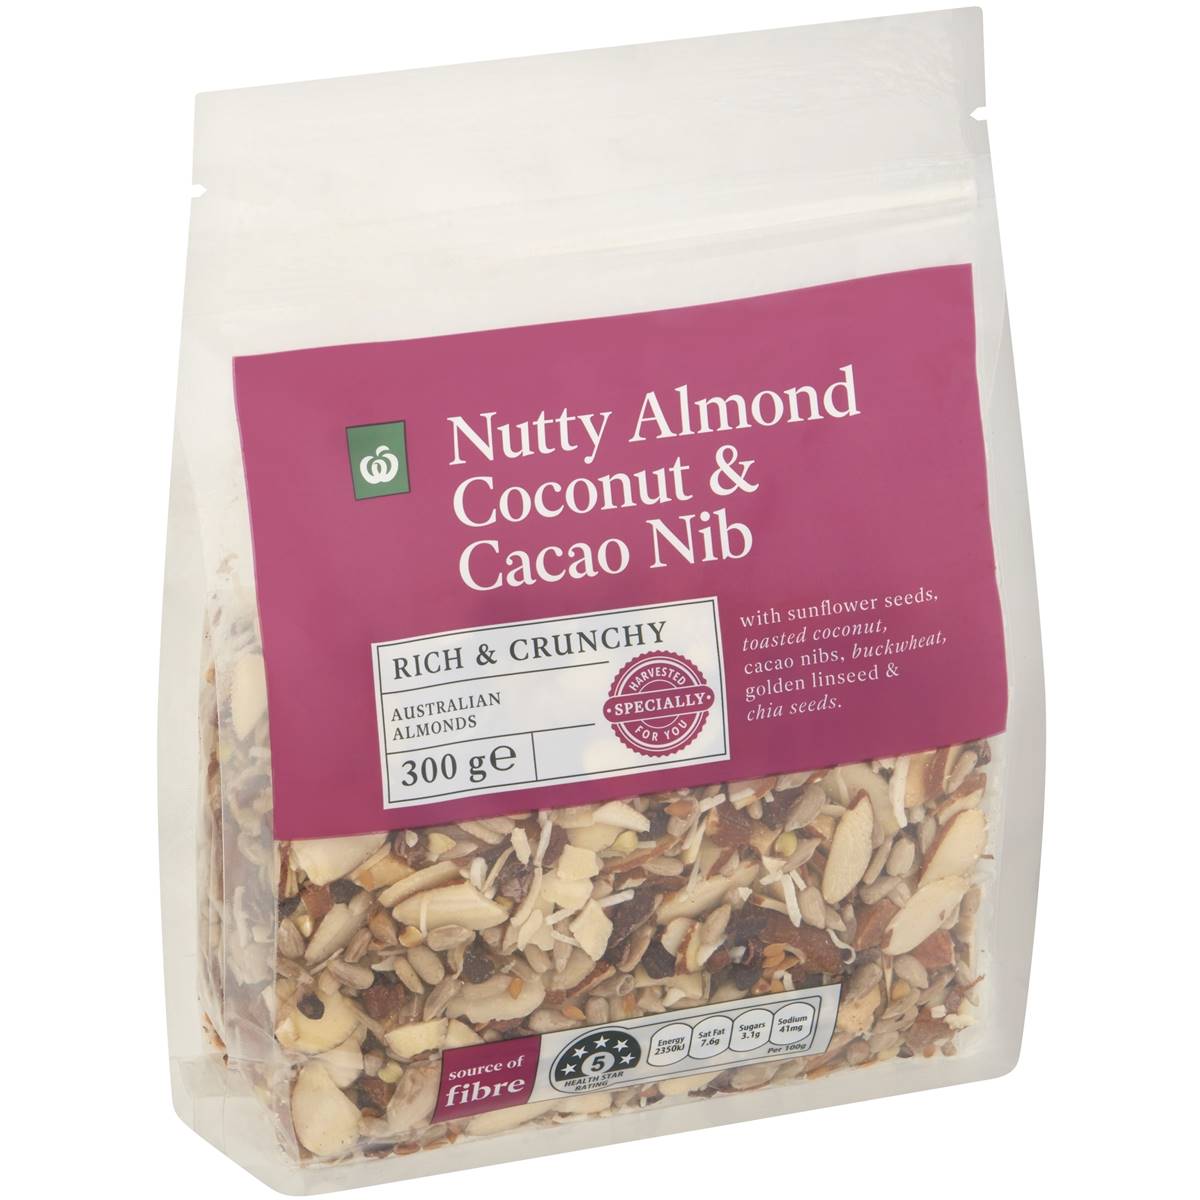 Calories in Woolworths Nutty Almond Coconut & Cacao Nib